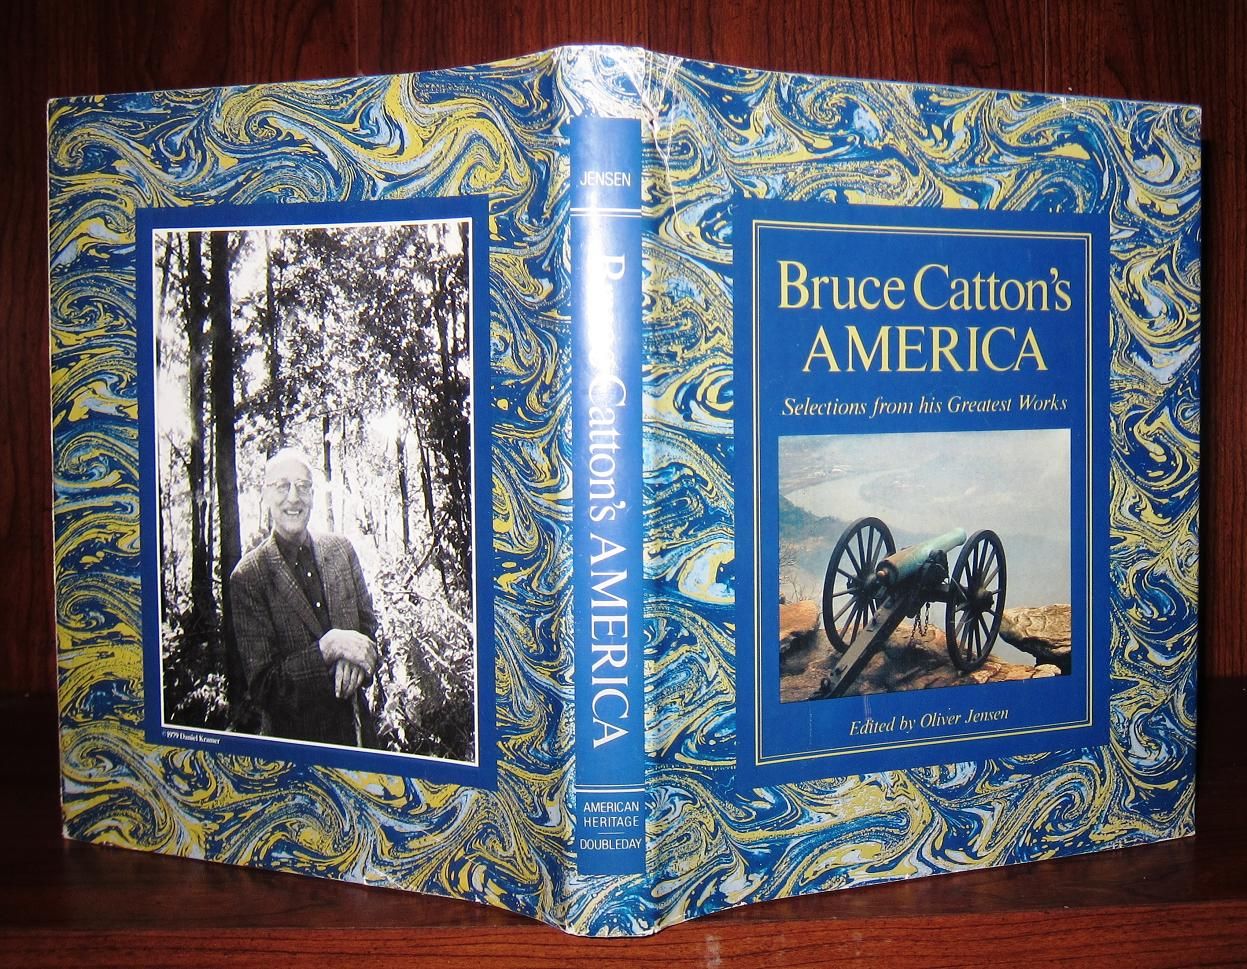 BRUCE CATTON - Bruce Catton's America Selections from His Greatest Works